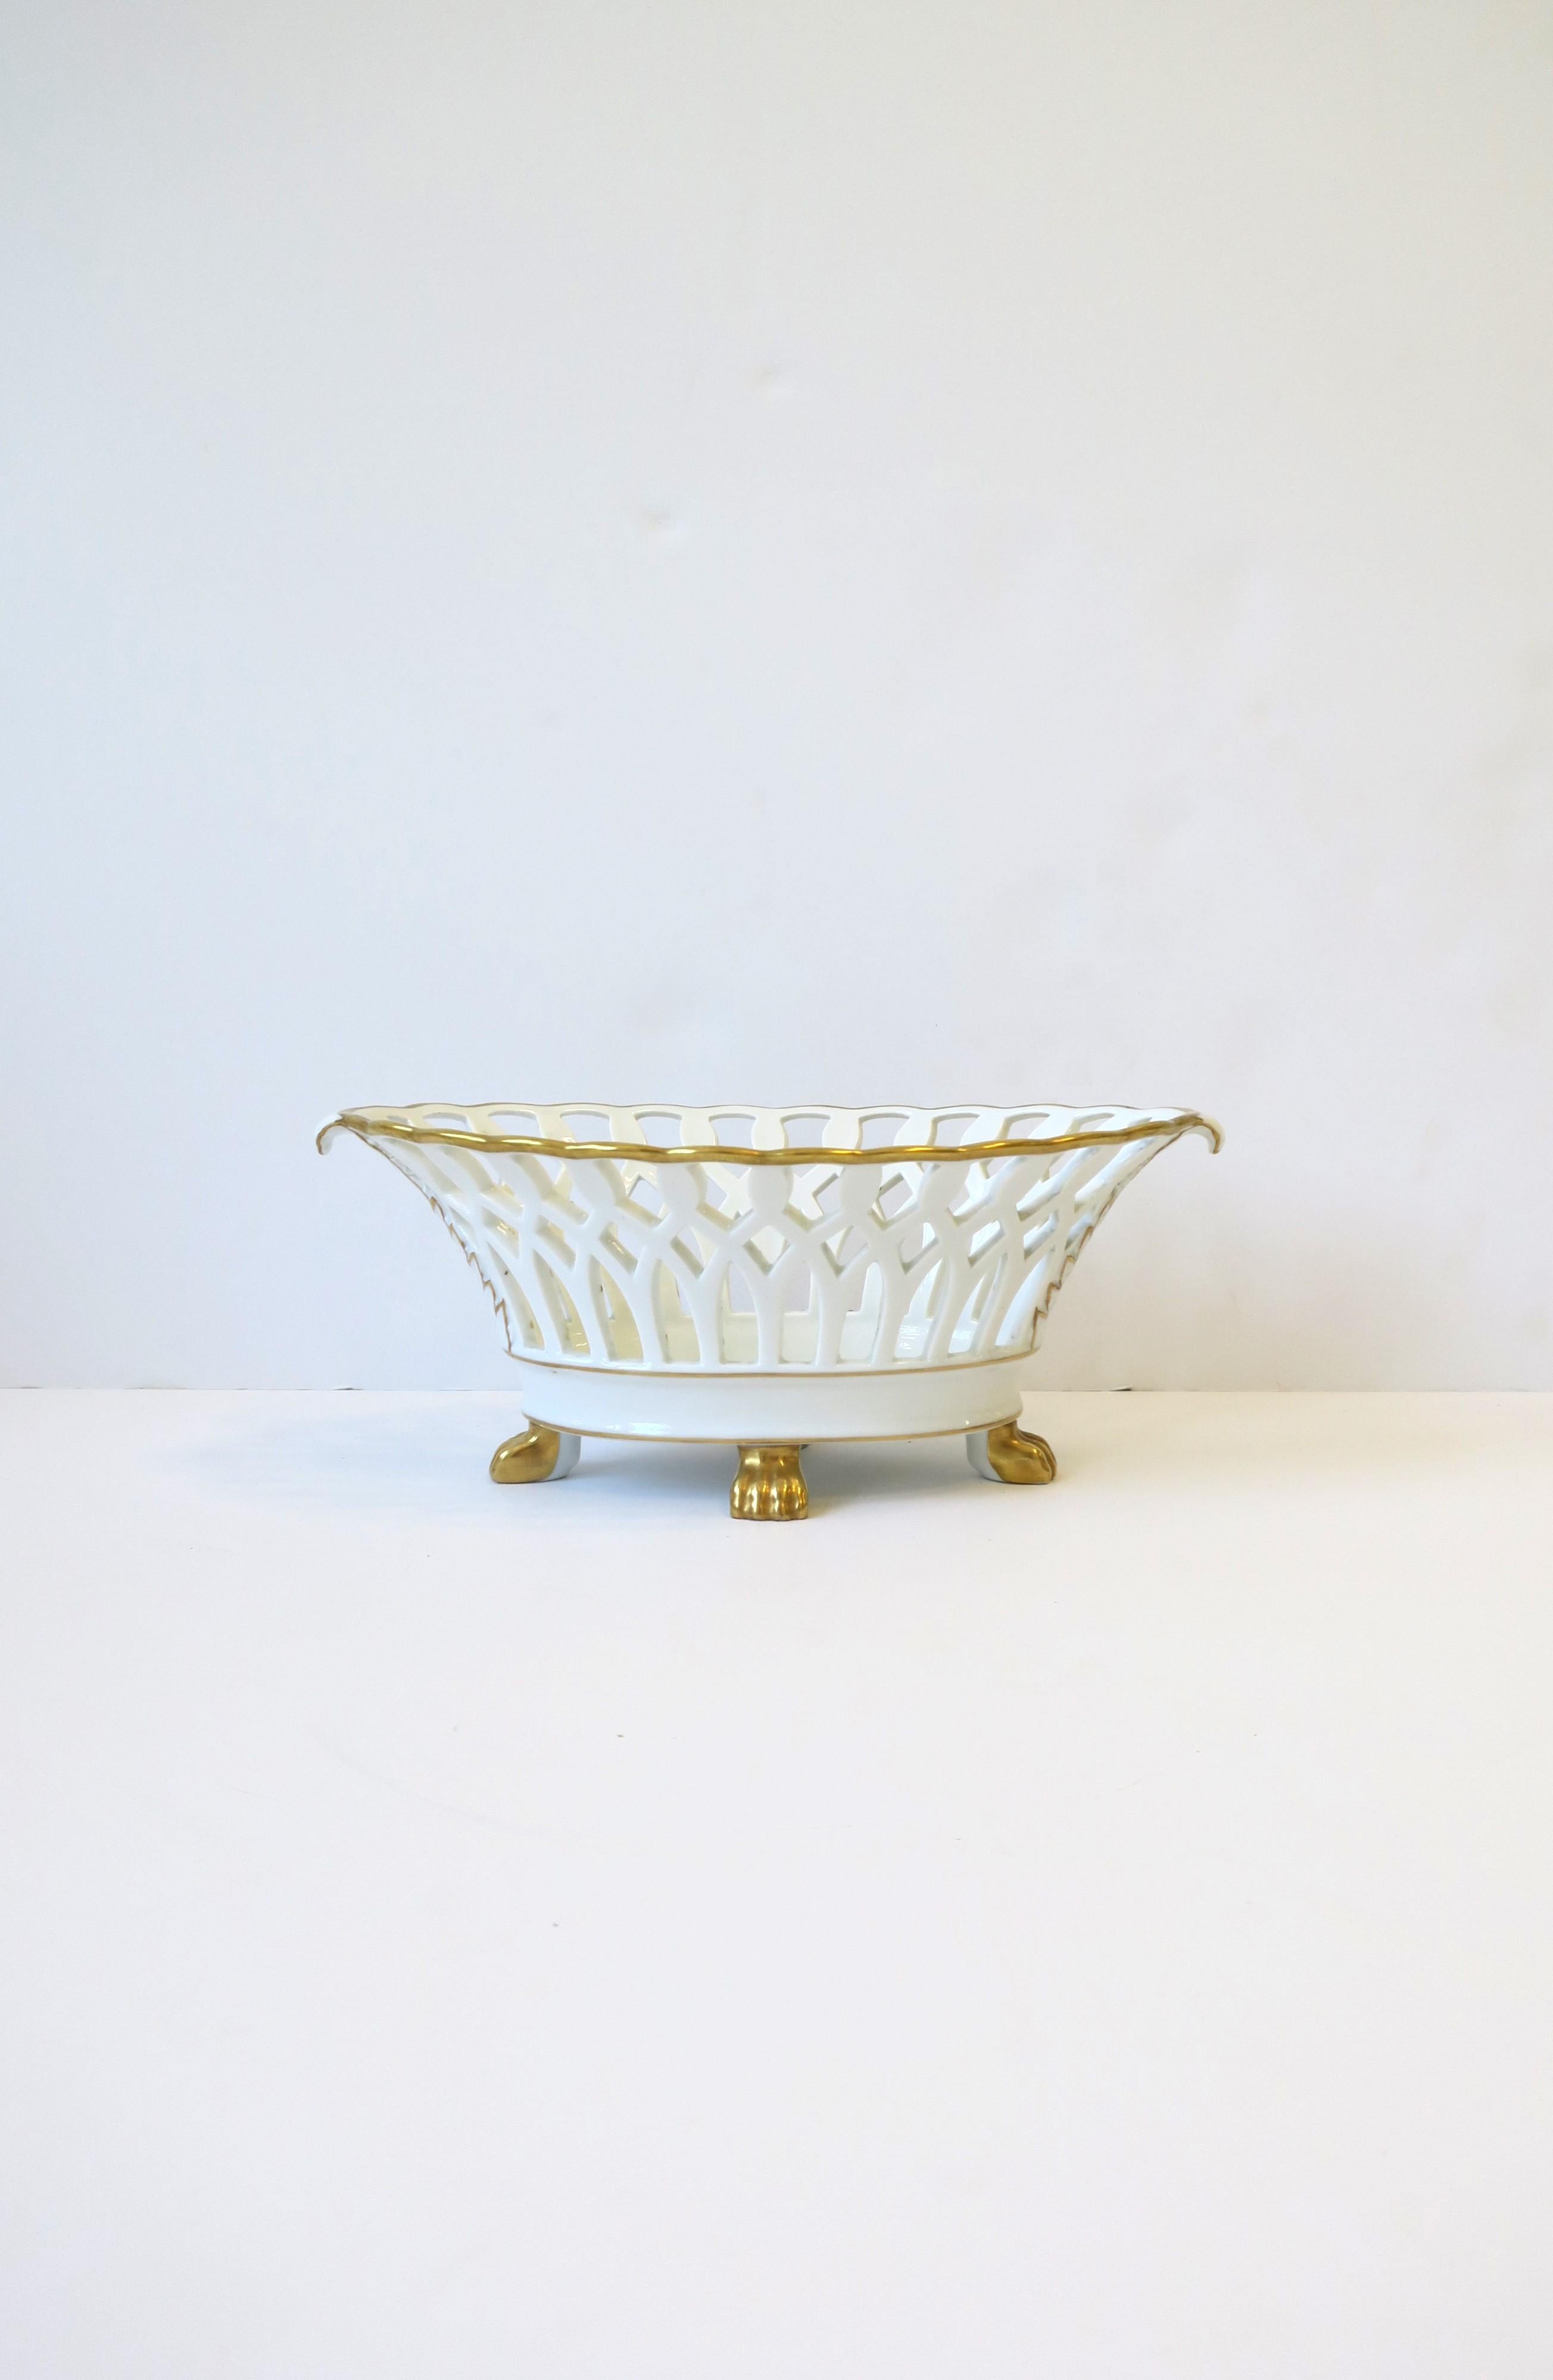 A beautiful oblong white and gold pierced 'Paris Porcelain' style porcelain compote basket bowl with lion paw feet in the Regency / Empire style, circa 20th century, Portugal. This porcelain basket is beautifully made, oblong/marque shape with gold